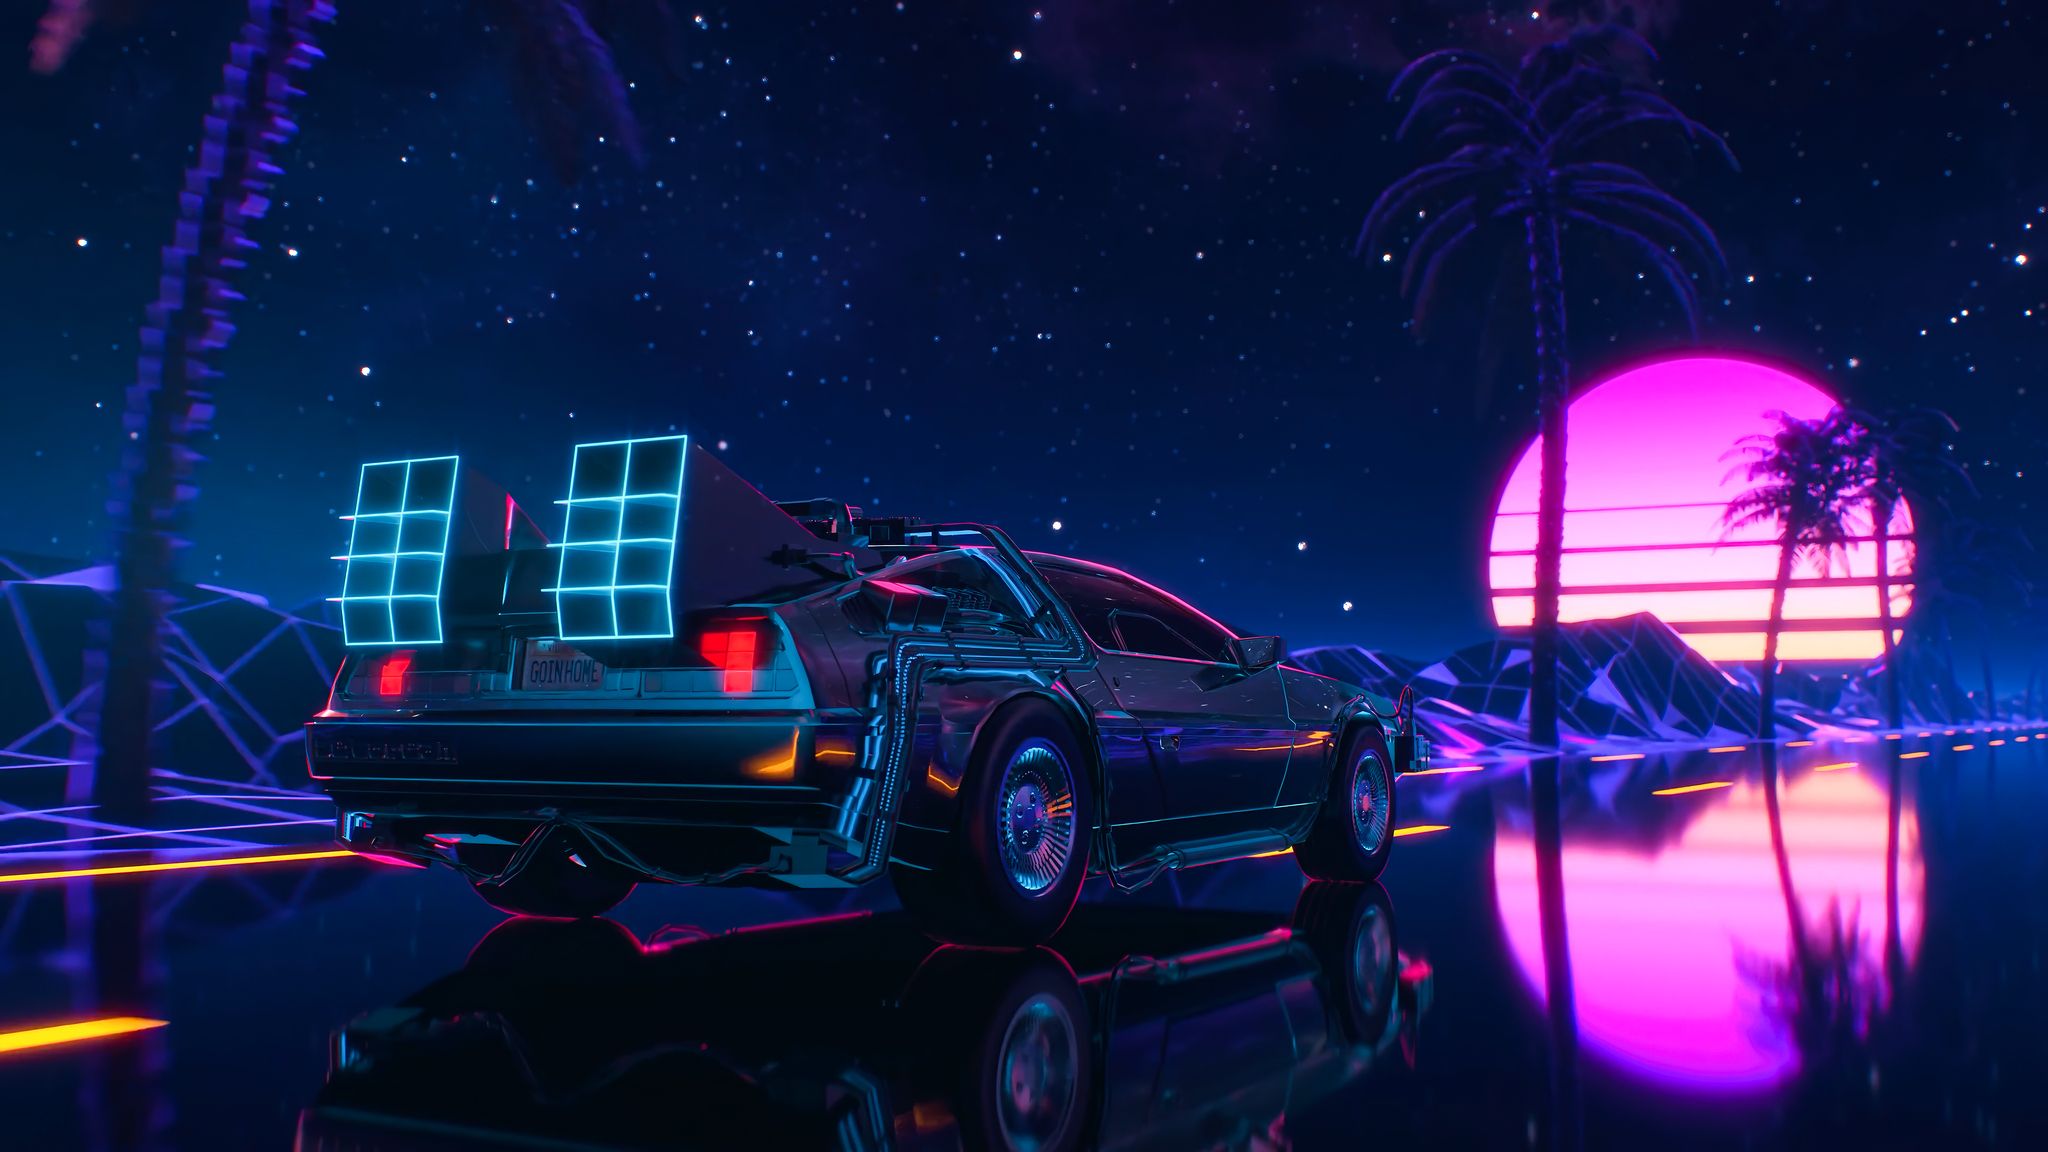 Download DeLorean, Retrowave, Synthwave, Neon, Glow, Automobile, Colorful Wallpaper in 2048x1152 Resolution